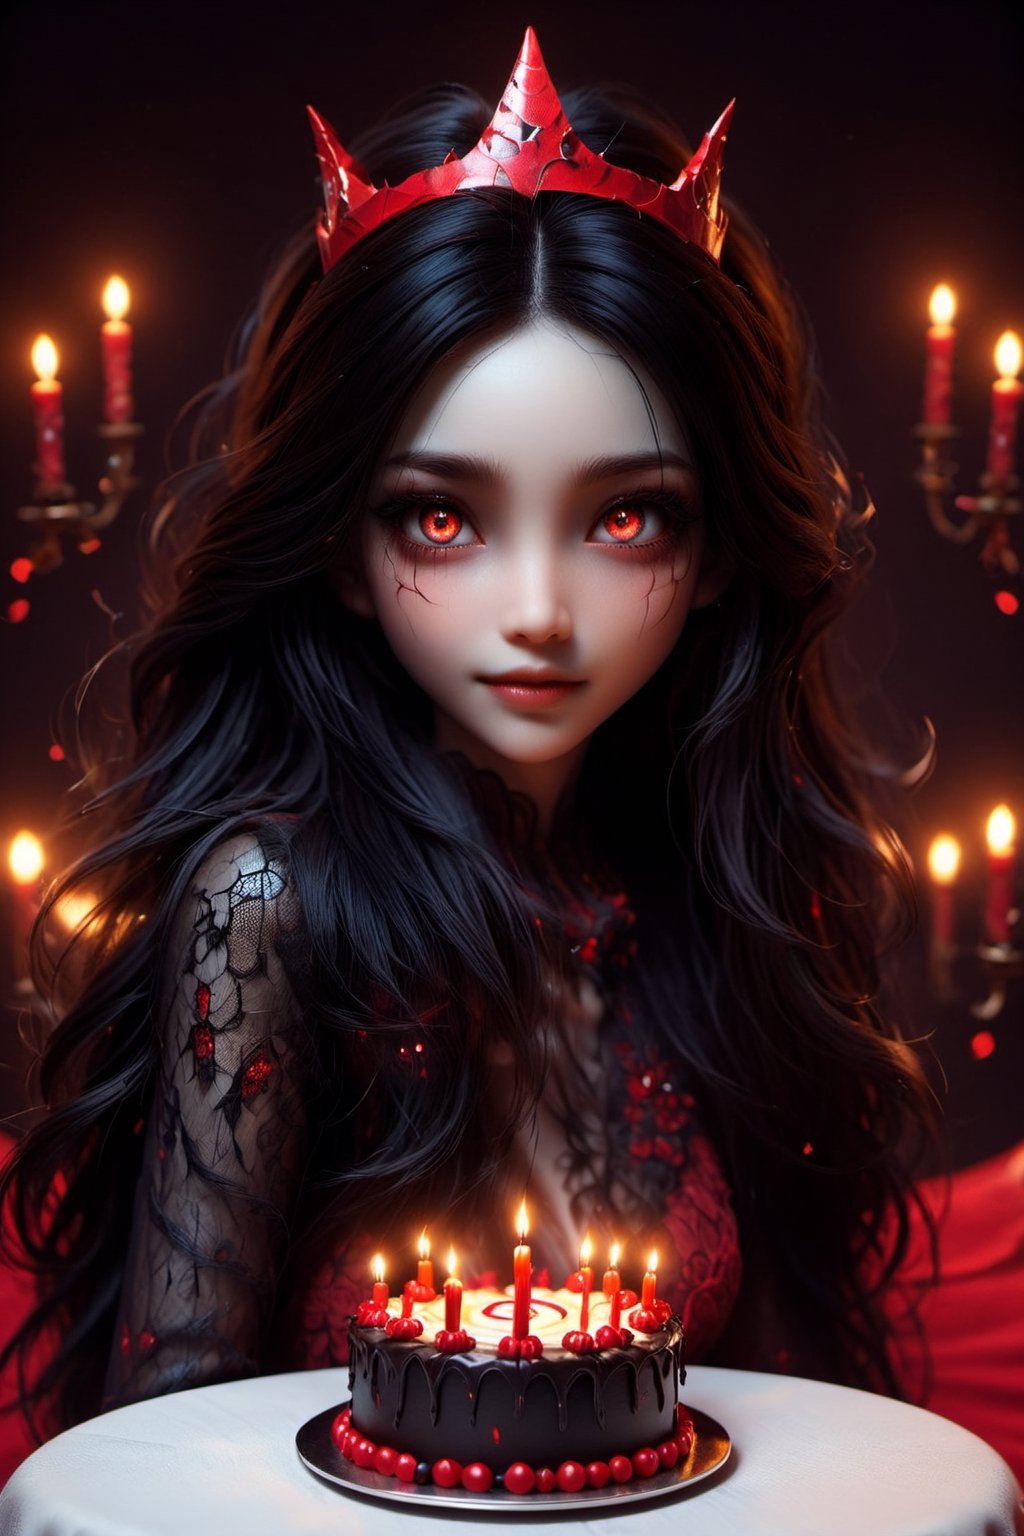 Masterpiece, best quality, ultra high res, ultra detailed, detailed face, detailed eyes, dark fantasy art, ((horror and dramatic)), 14 years old girl, upper body, beautiful girl, cute, (pale skin), long black hair, in ear hair, smile, red birthday cake at table, holding a big black sign with (("HAPPY BIRTHDAY)) ((DAYAT")), text logo, small text, black, red, glowing, glow:1.3, with her hands, (red glowing eyes), sitting at night castle, focus on viewer, front view, Movie Still, upper body, monster,Text logo